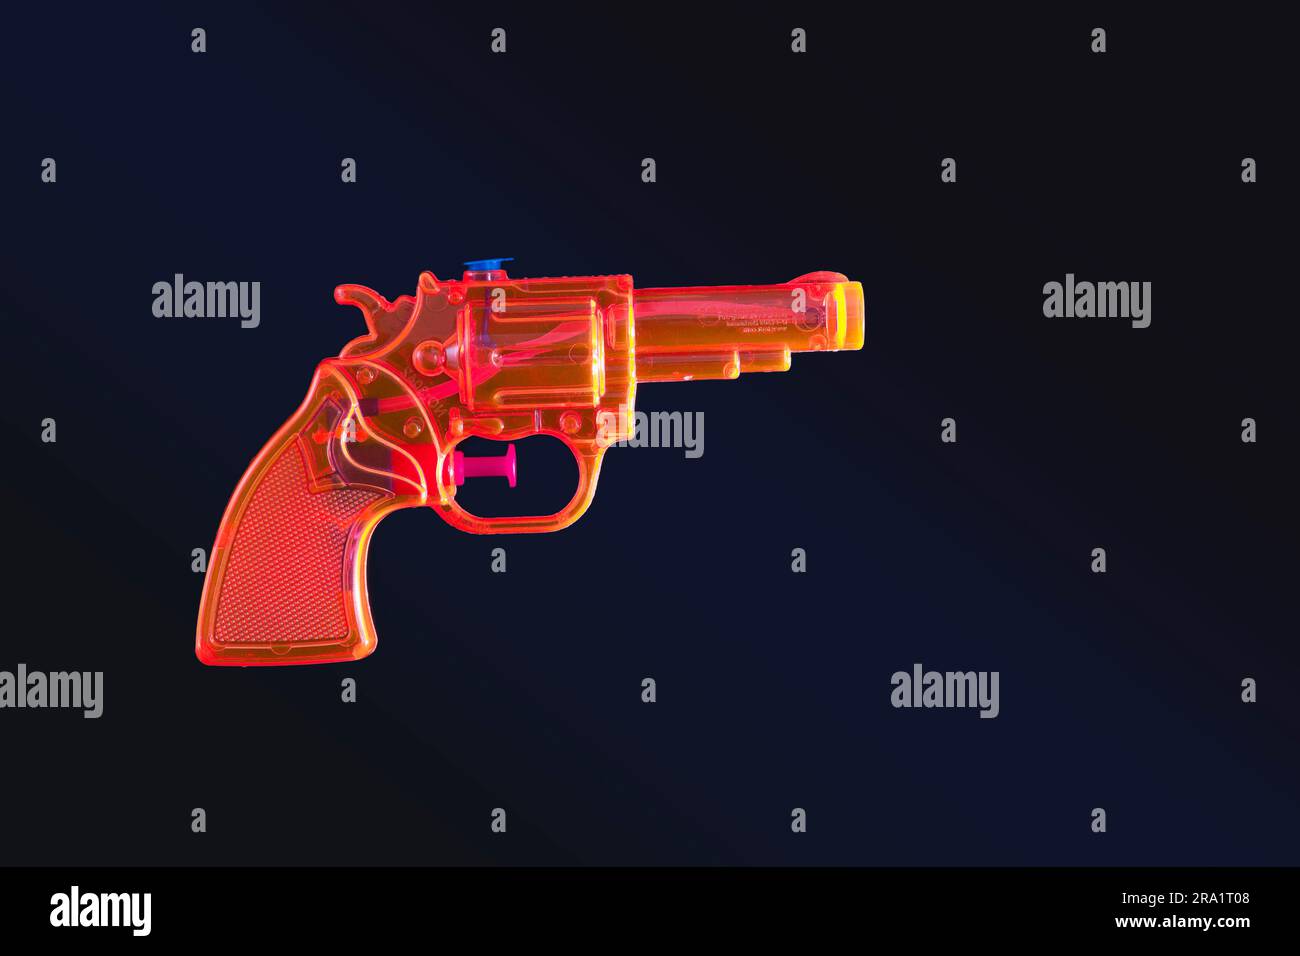 Cut out of an orange toy gun against black Stock Photo